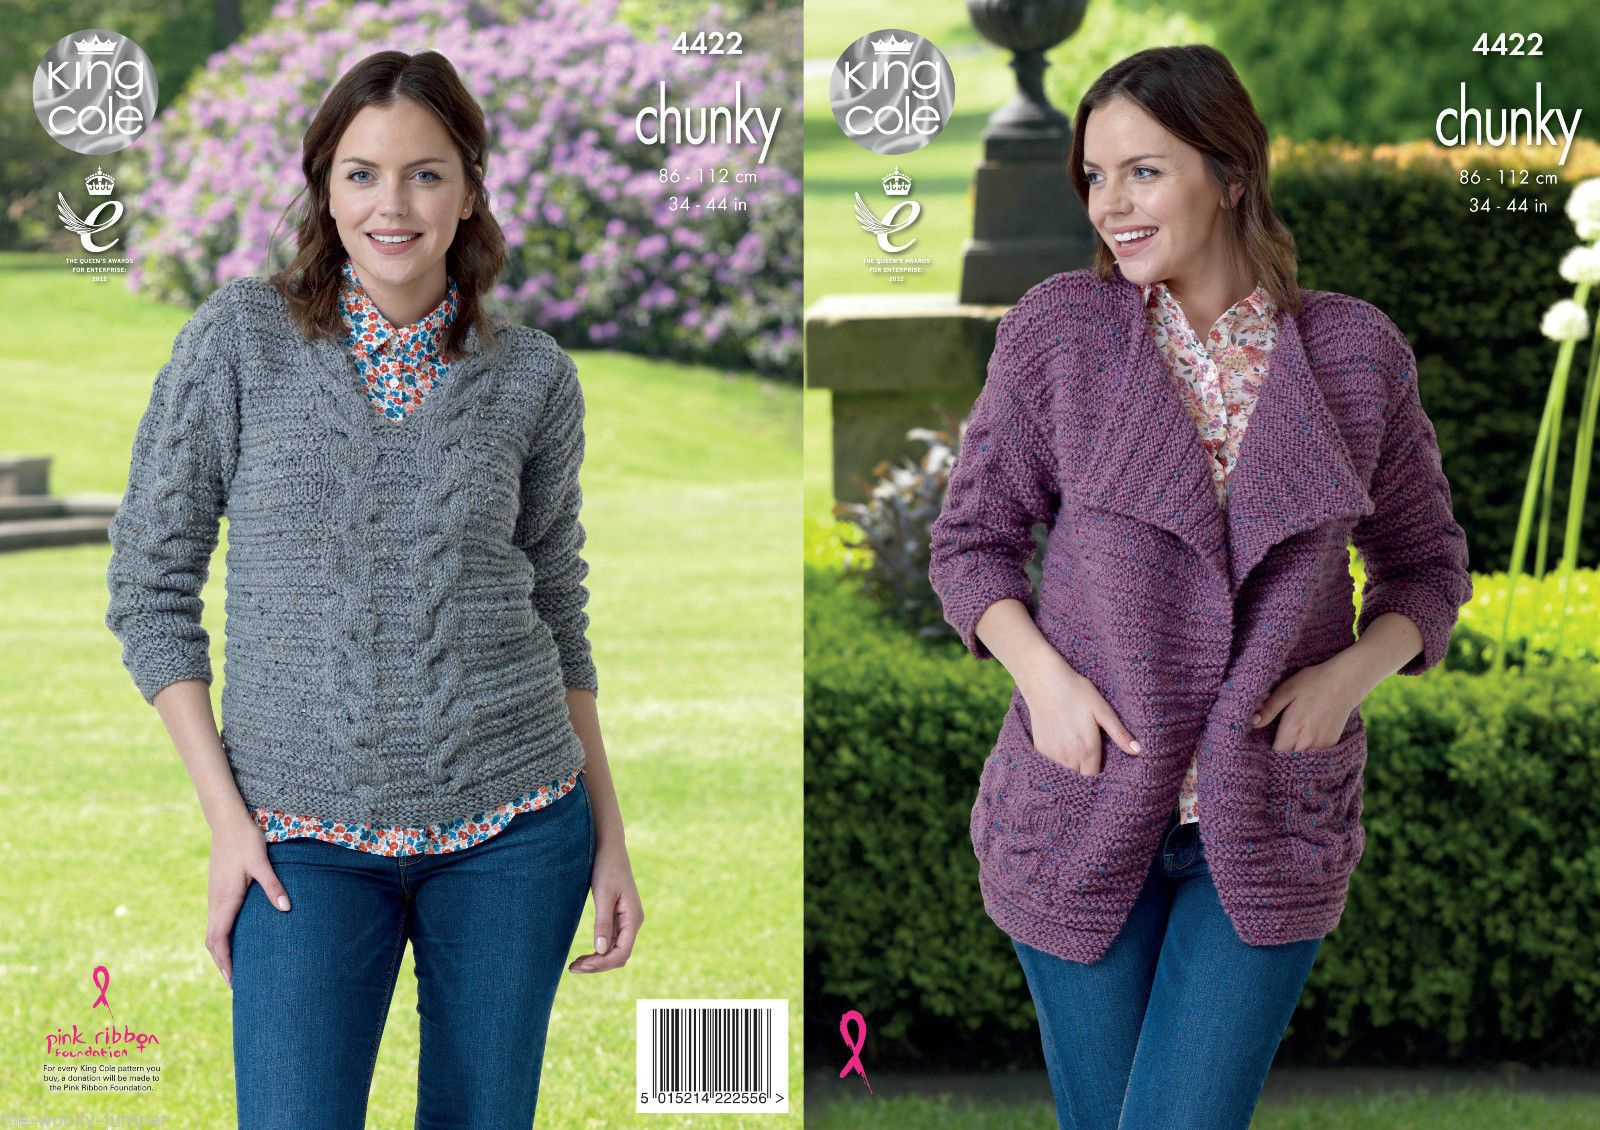 Tweed Knitting Patterns 4422 King Cole Chunky Tweed Jacket Sweater Knitting Pattern To Fit Chest Size 34 To 44